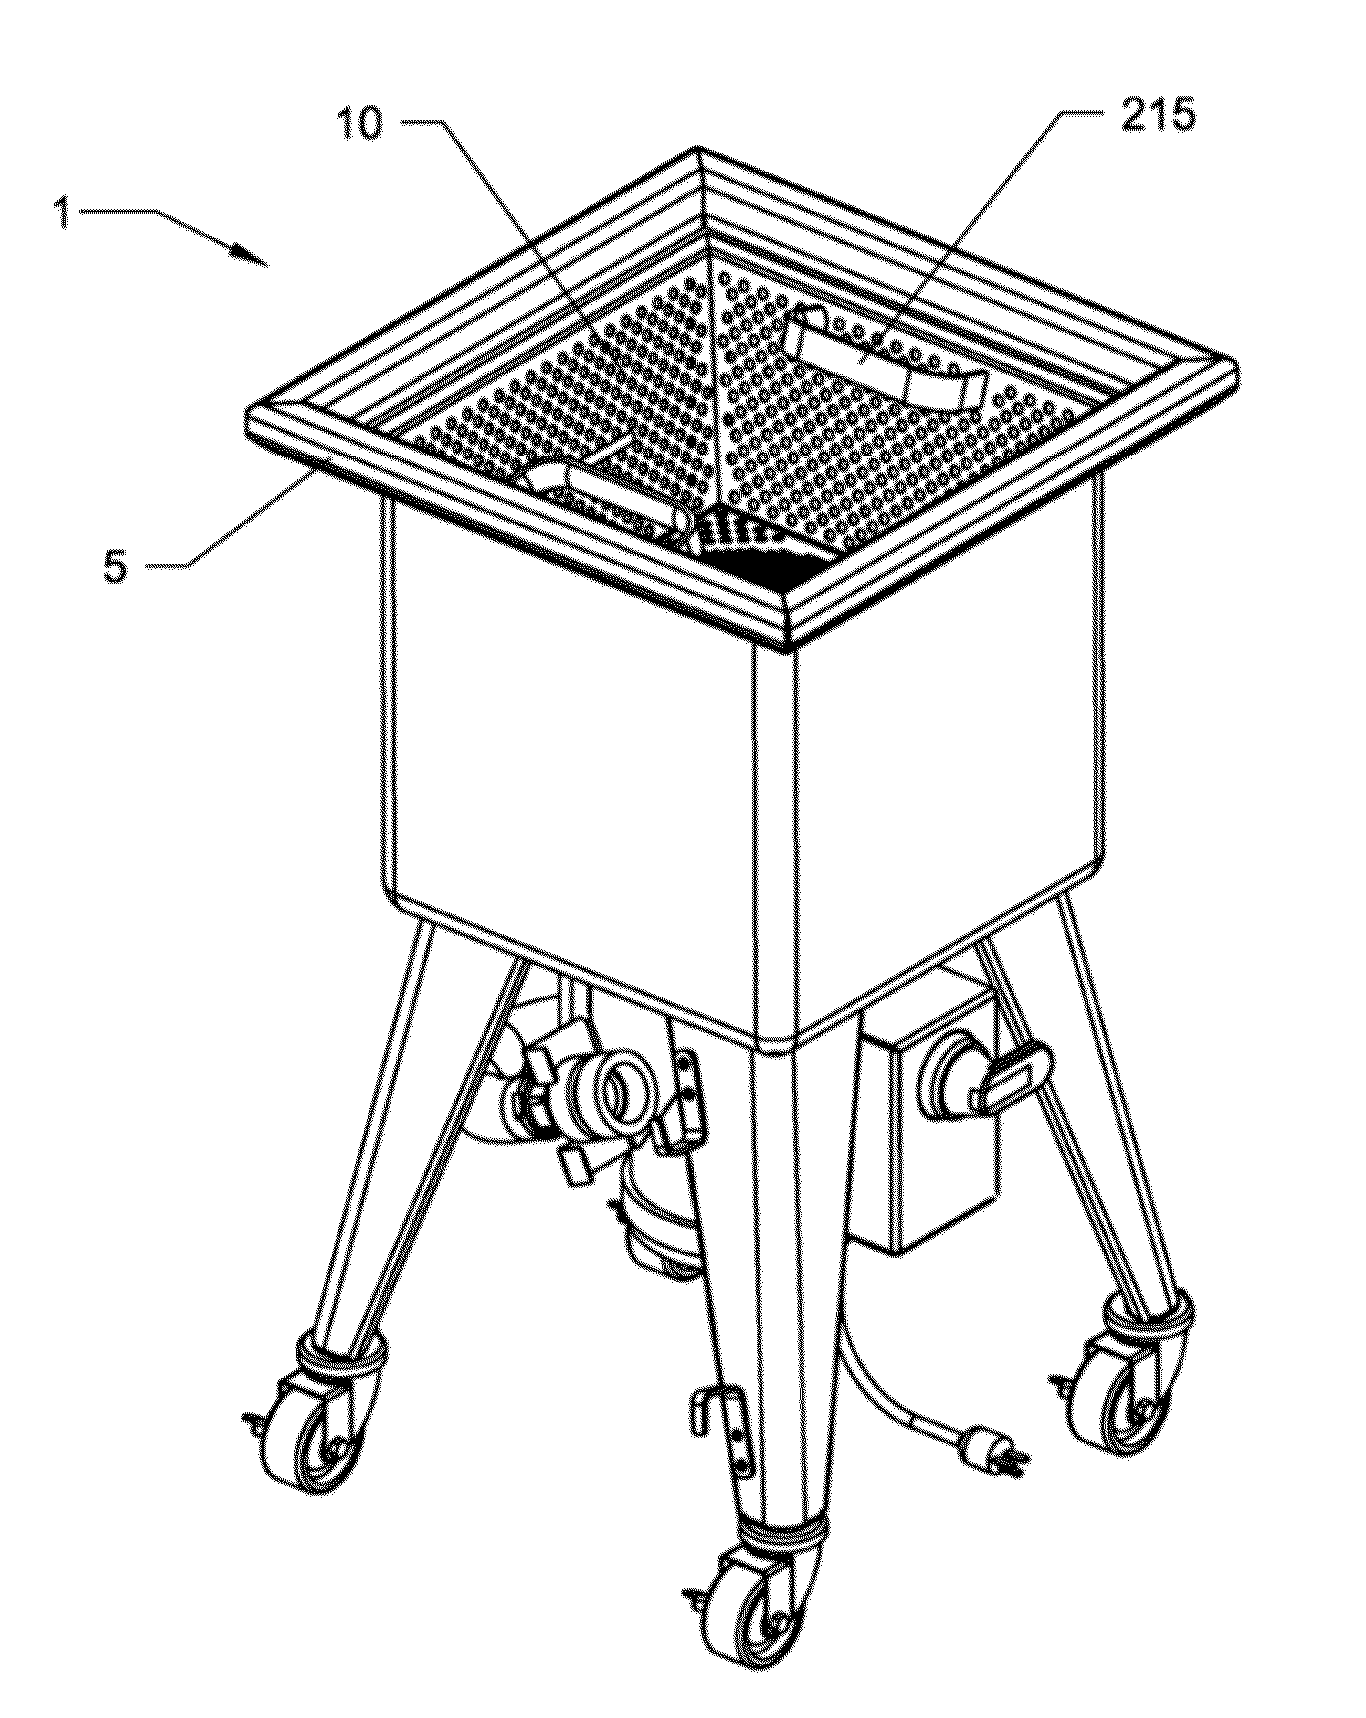 Defrost apparatus and method thereof